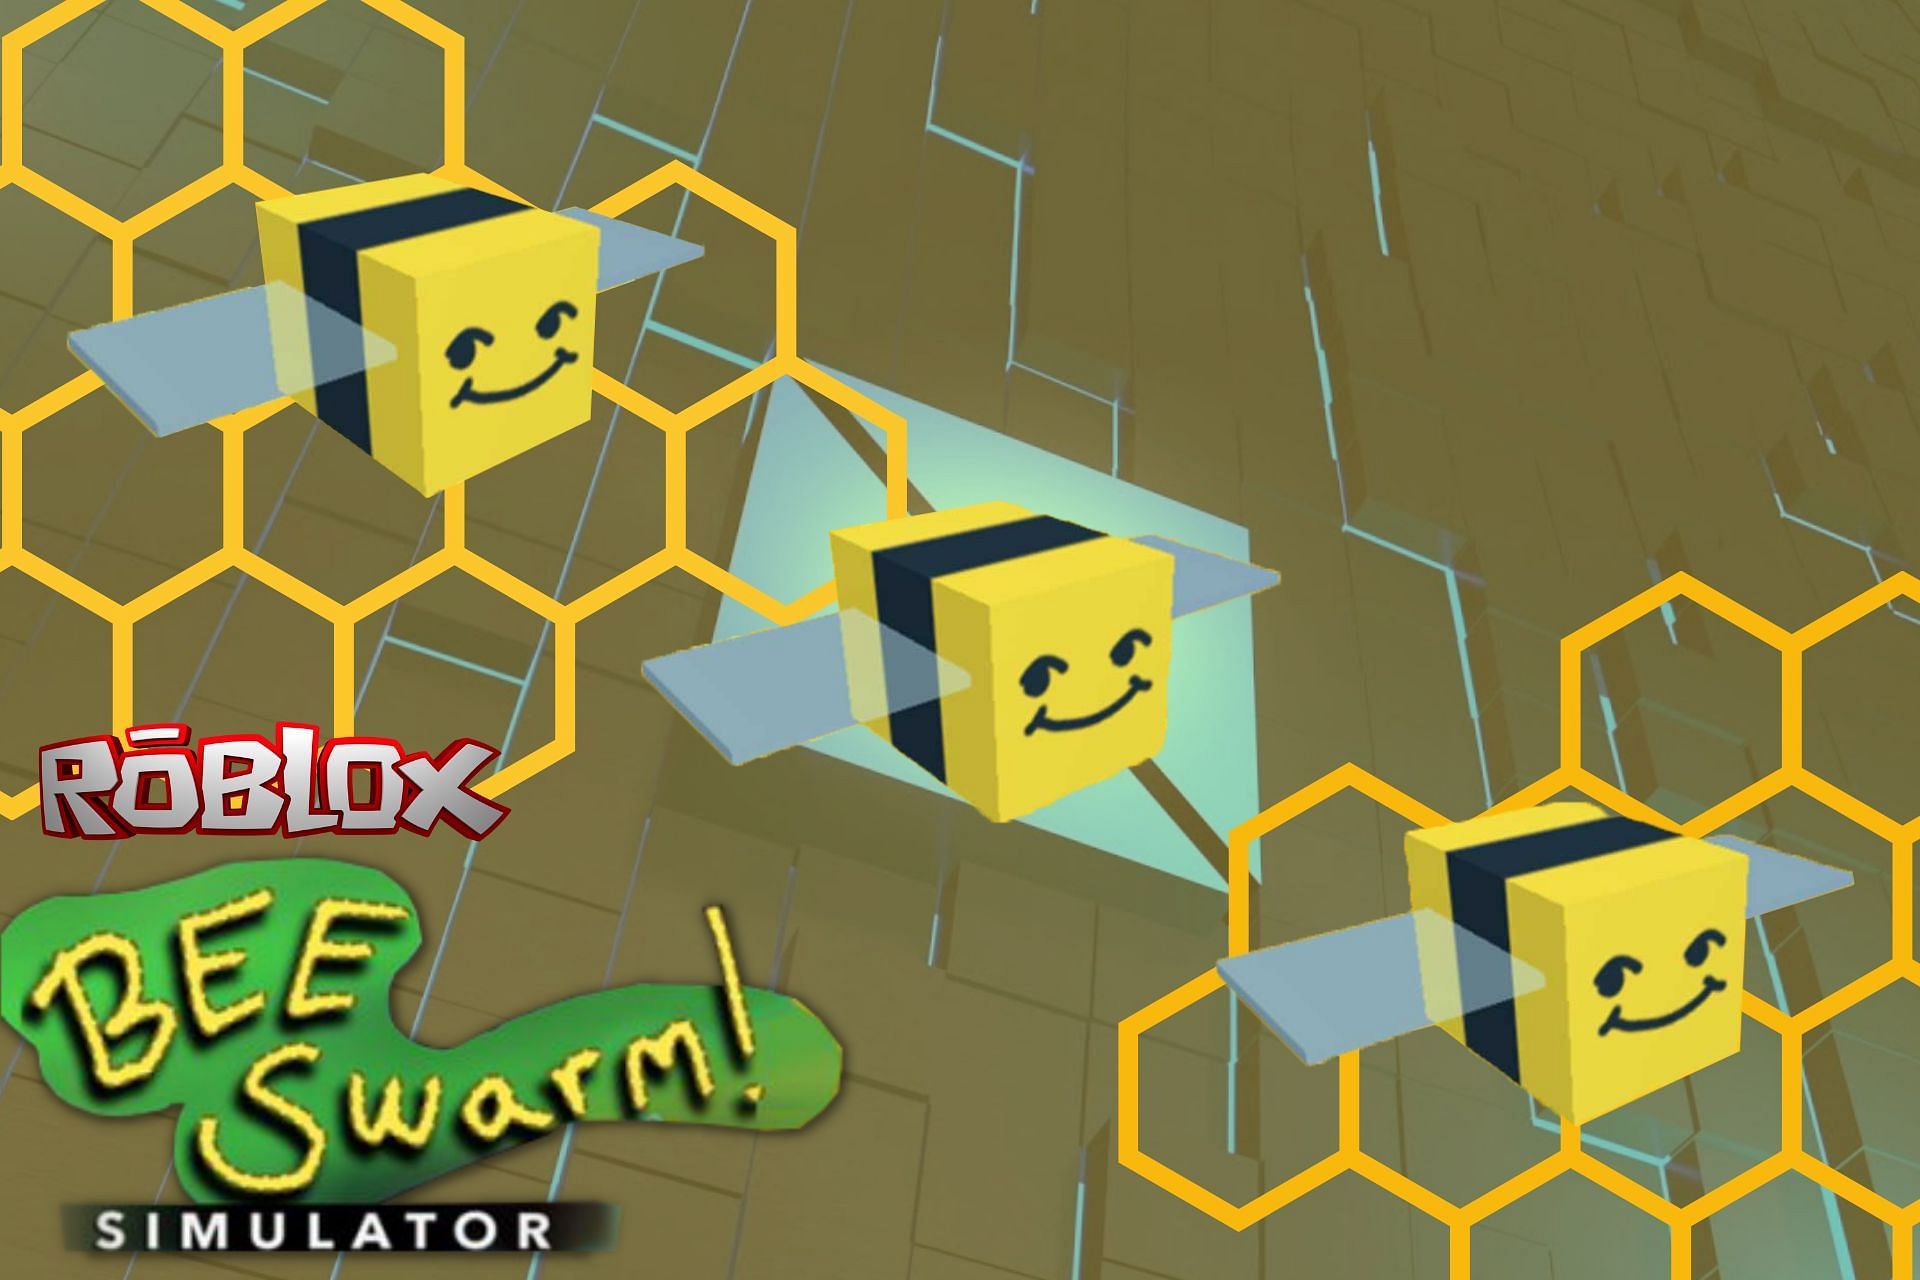 Wasted all my Bitterberries on this : r/BeeSwarmSimulator